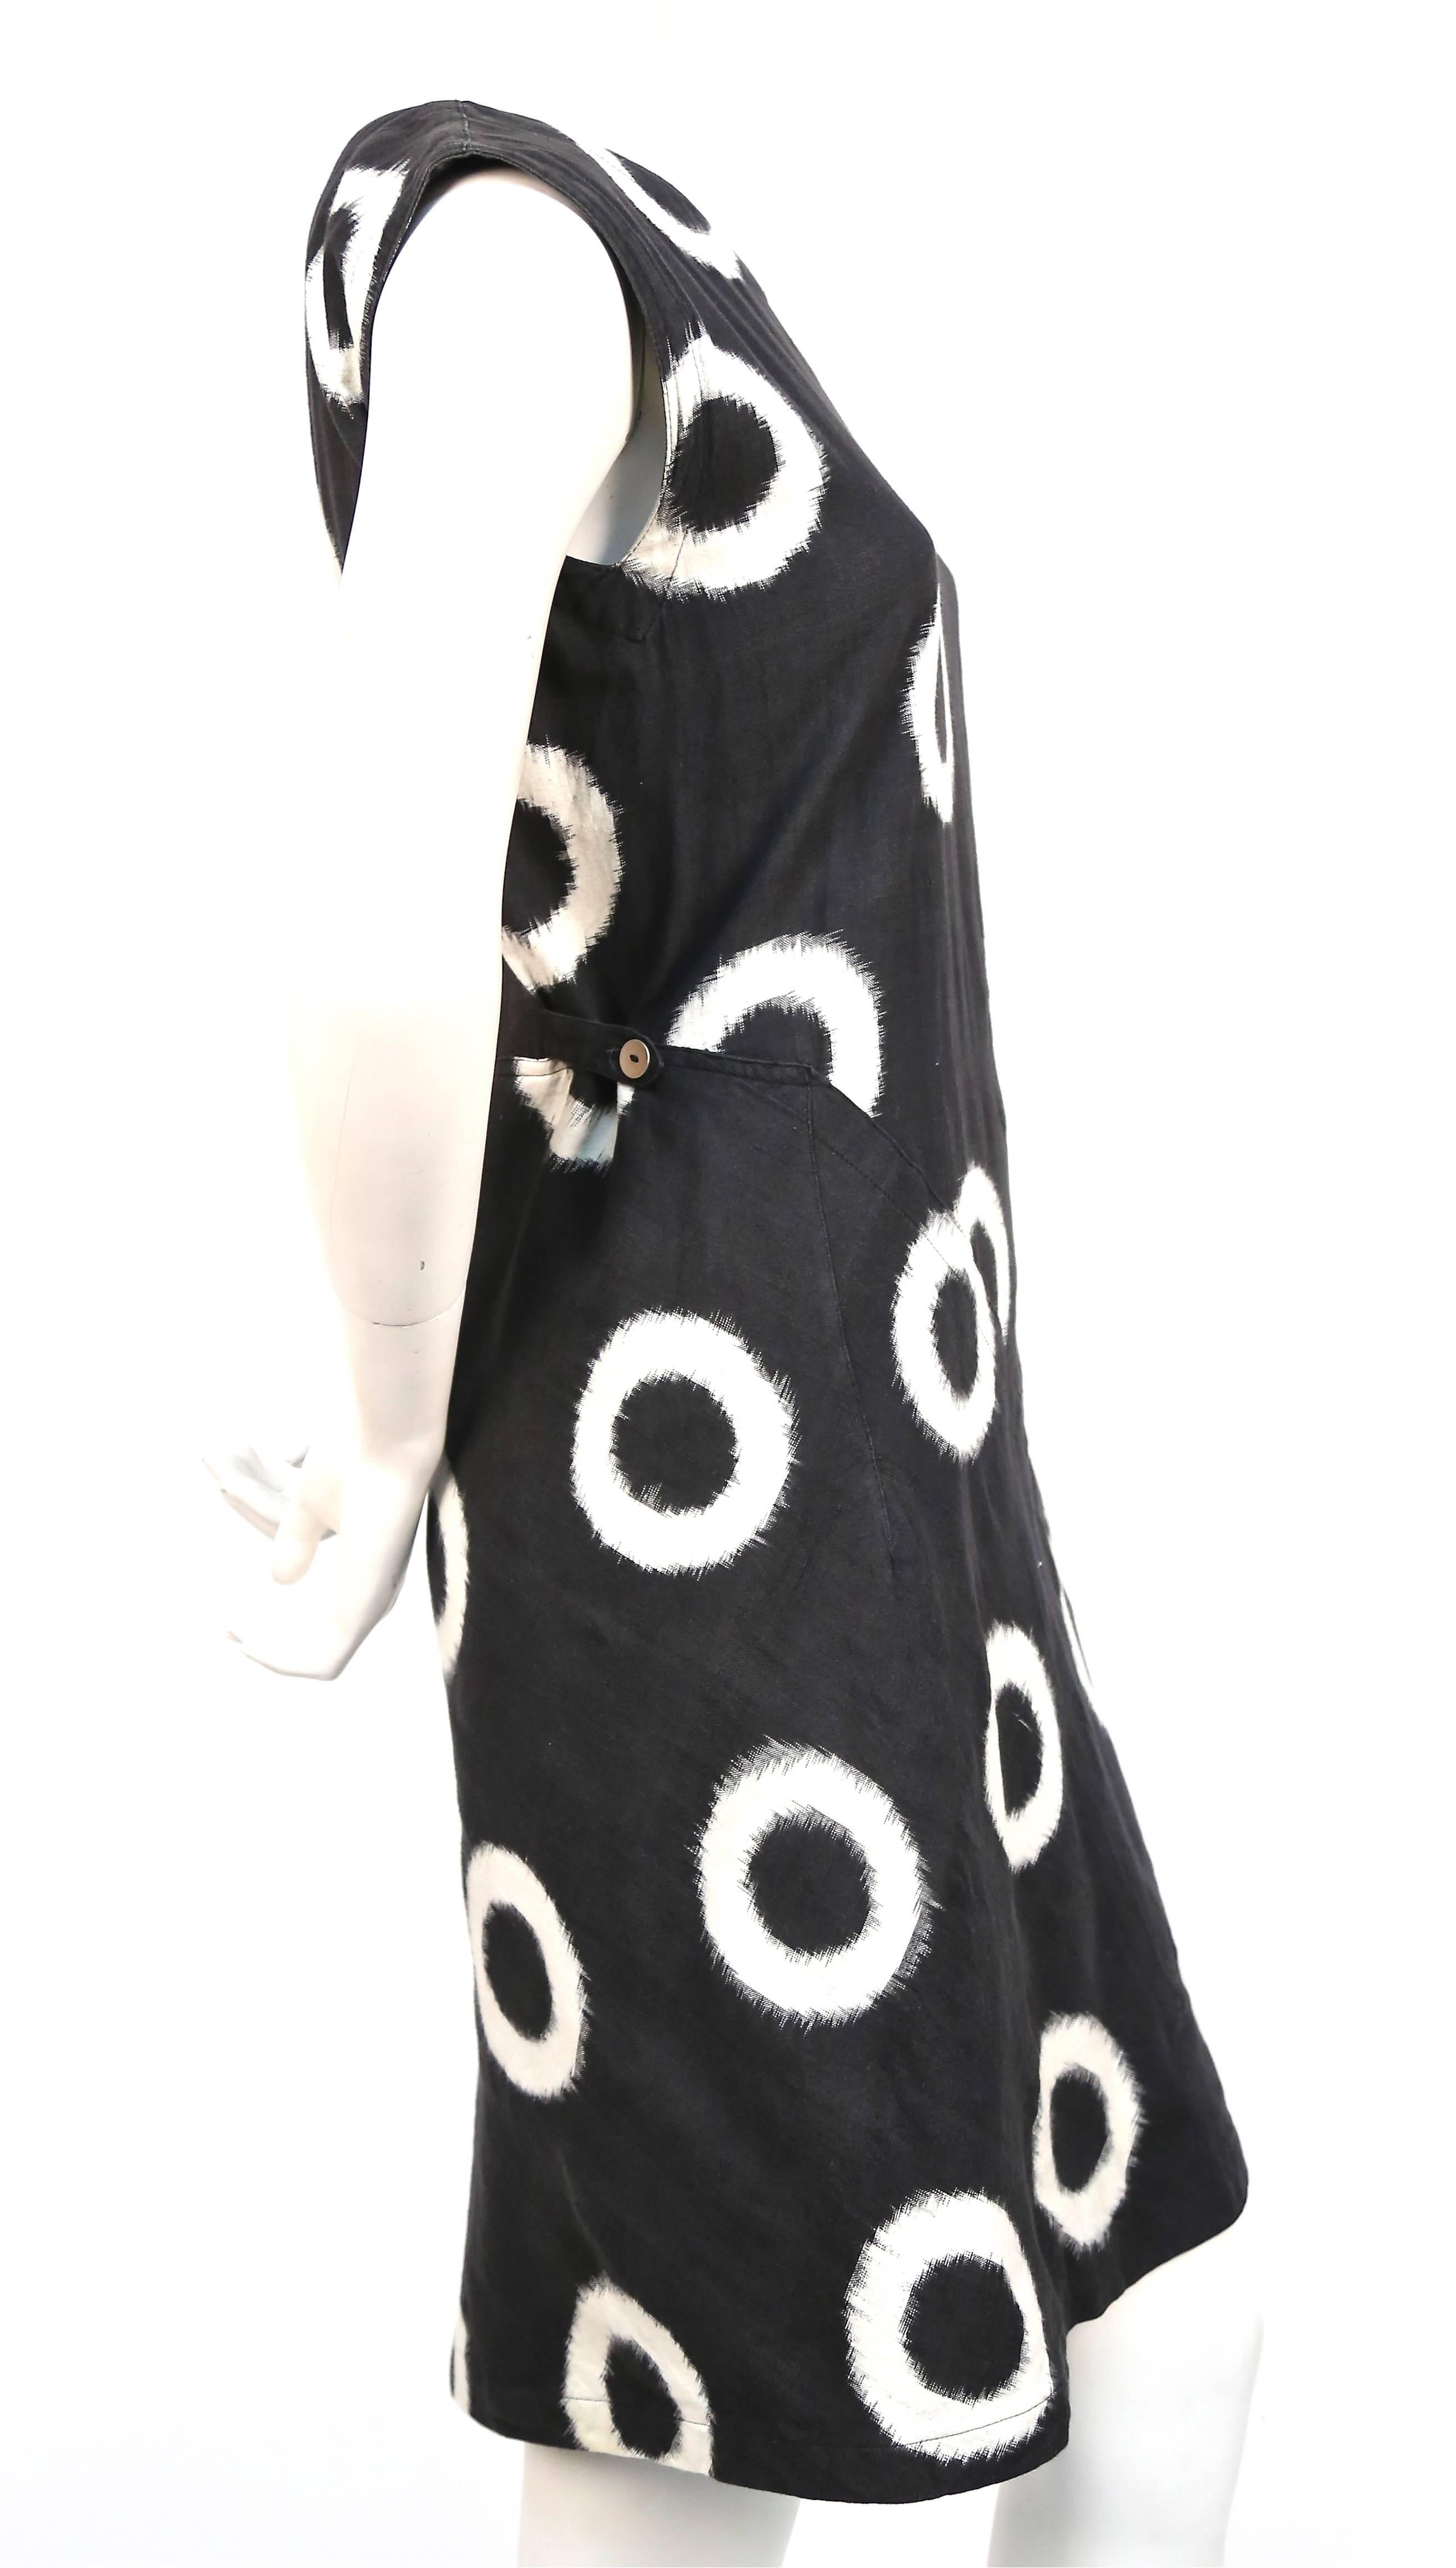 Soft black and off-white circular Ikat printed cotton dress from Issey Miyake dating to 1986.   A very similar dress was featured on the spring 1986 Miyake runway. Dress best fits a size S or possibly a size M. Approximate measurements are: bust